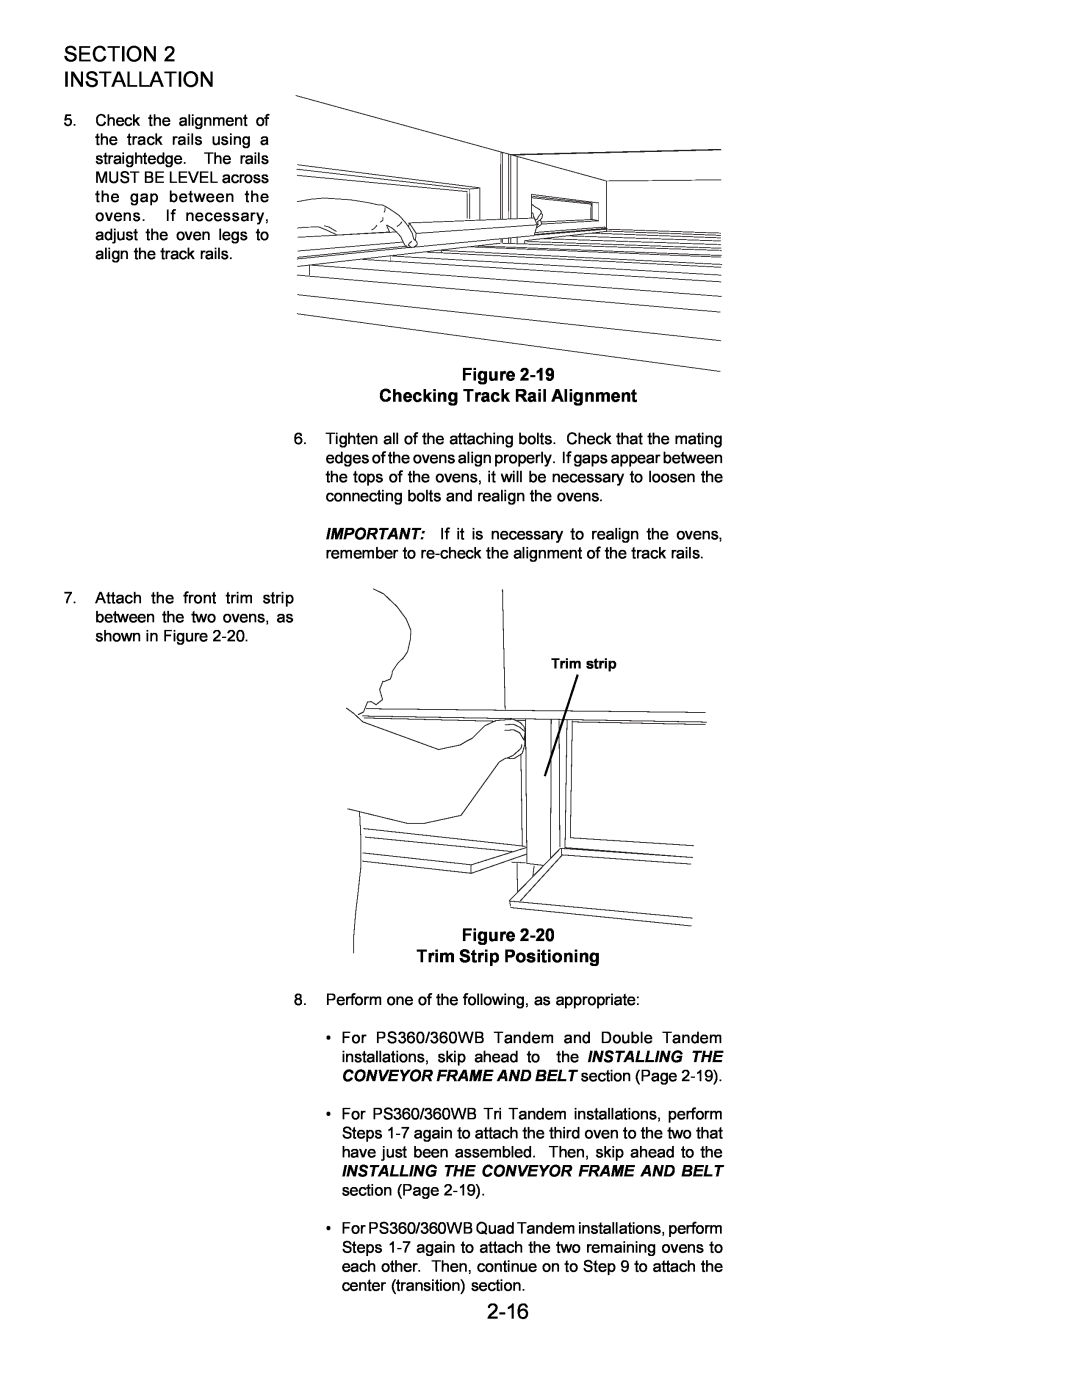 Middleby Marshall Oven owner manual 2-16, Checking Track Rail Alignment, Trim Strip Positioning, Section Installation 